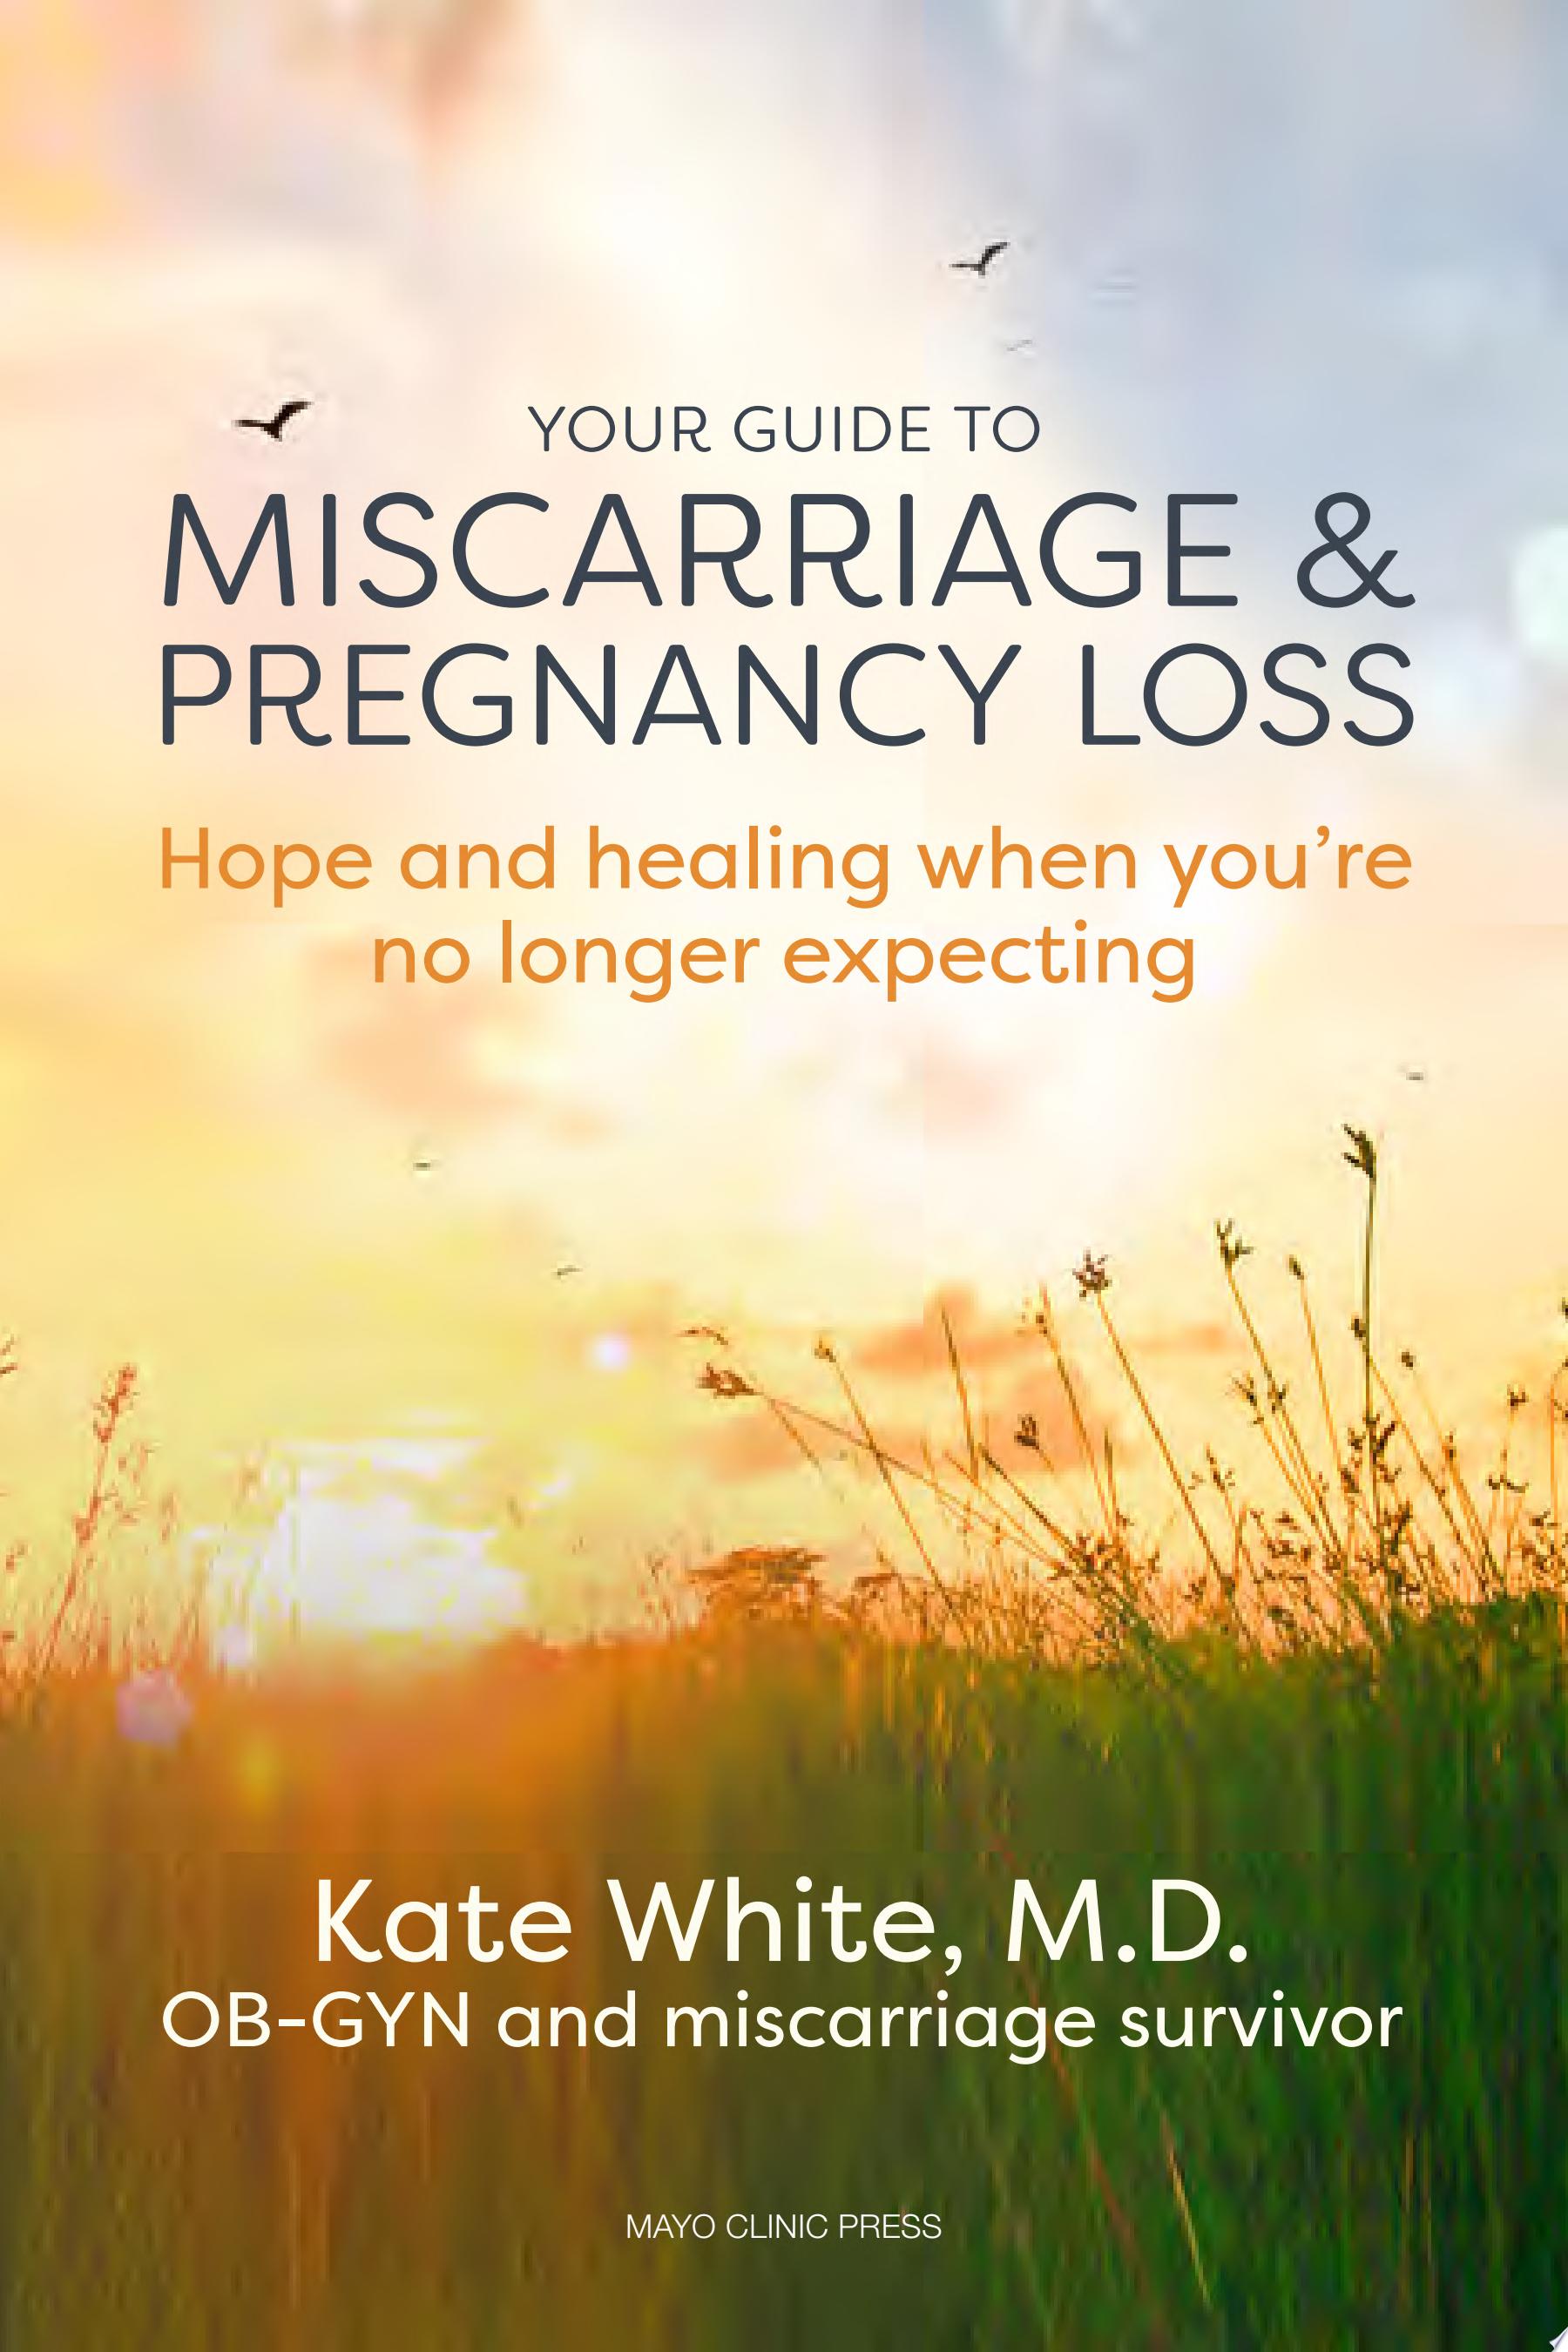 Image for "Your Guide to Miscarriage and Pregnancy Loss"